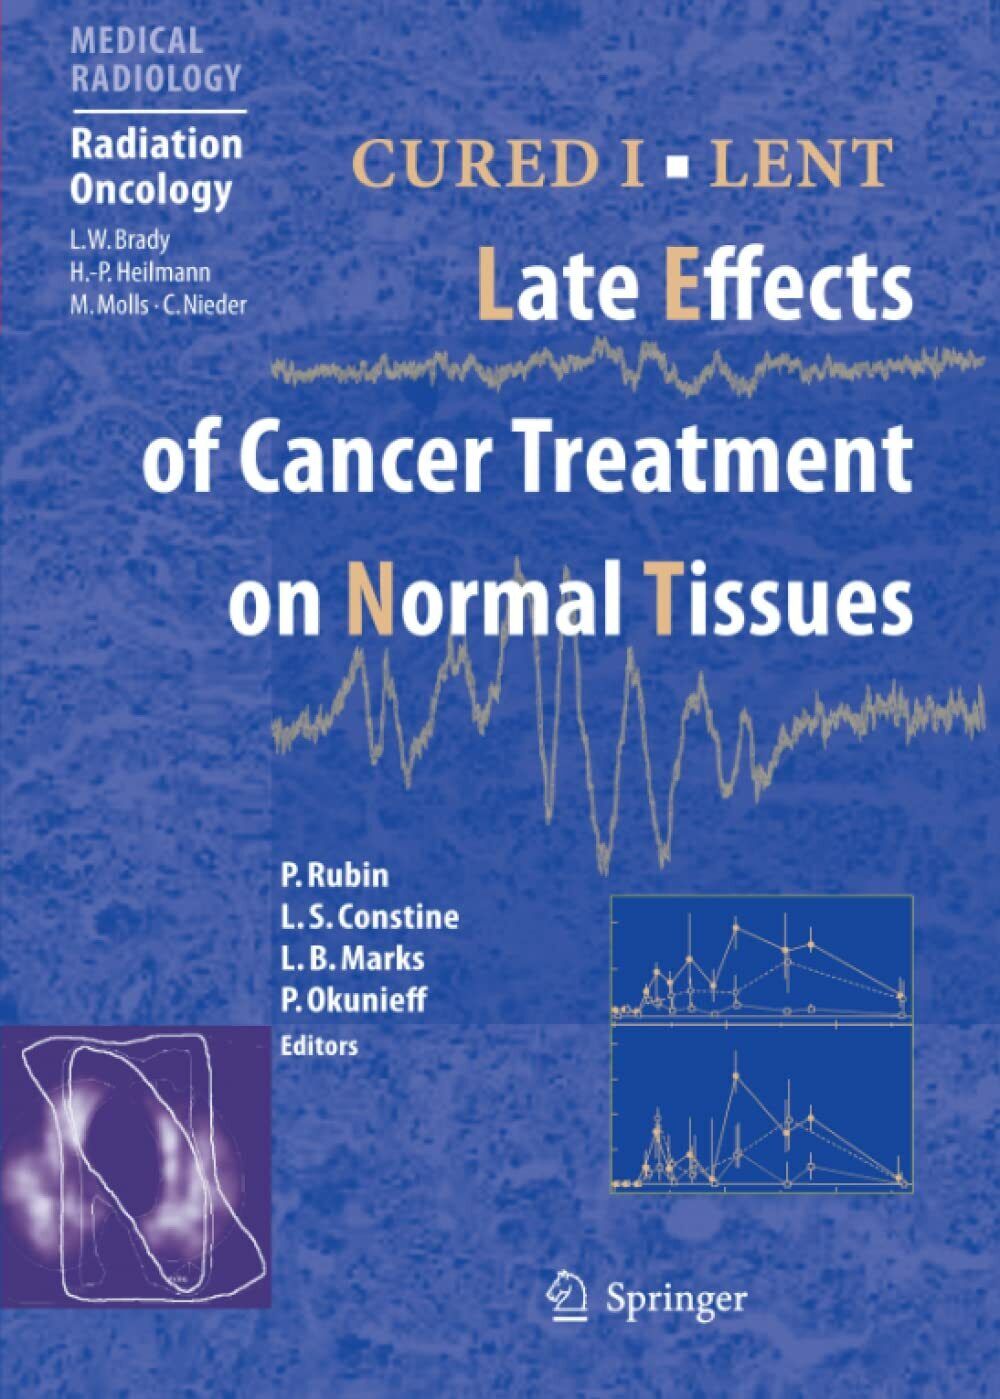 CURED I - LENT Late Effects of Cancer Treatment on Normal Tissues - 2010 libro usato